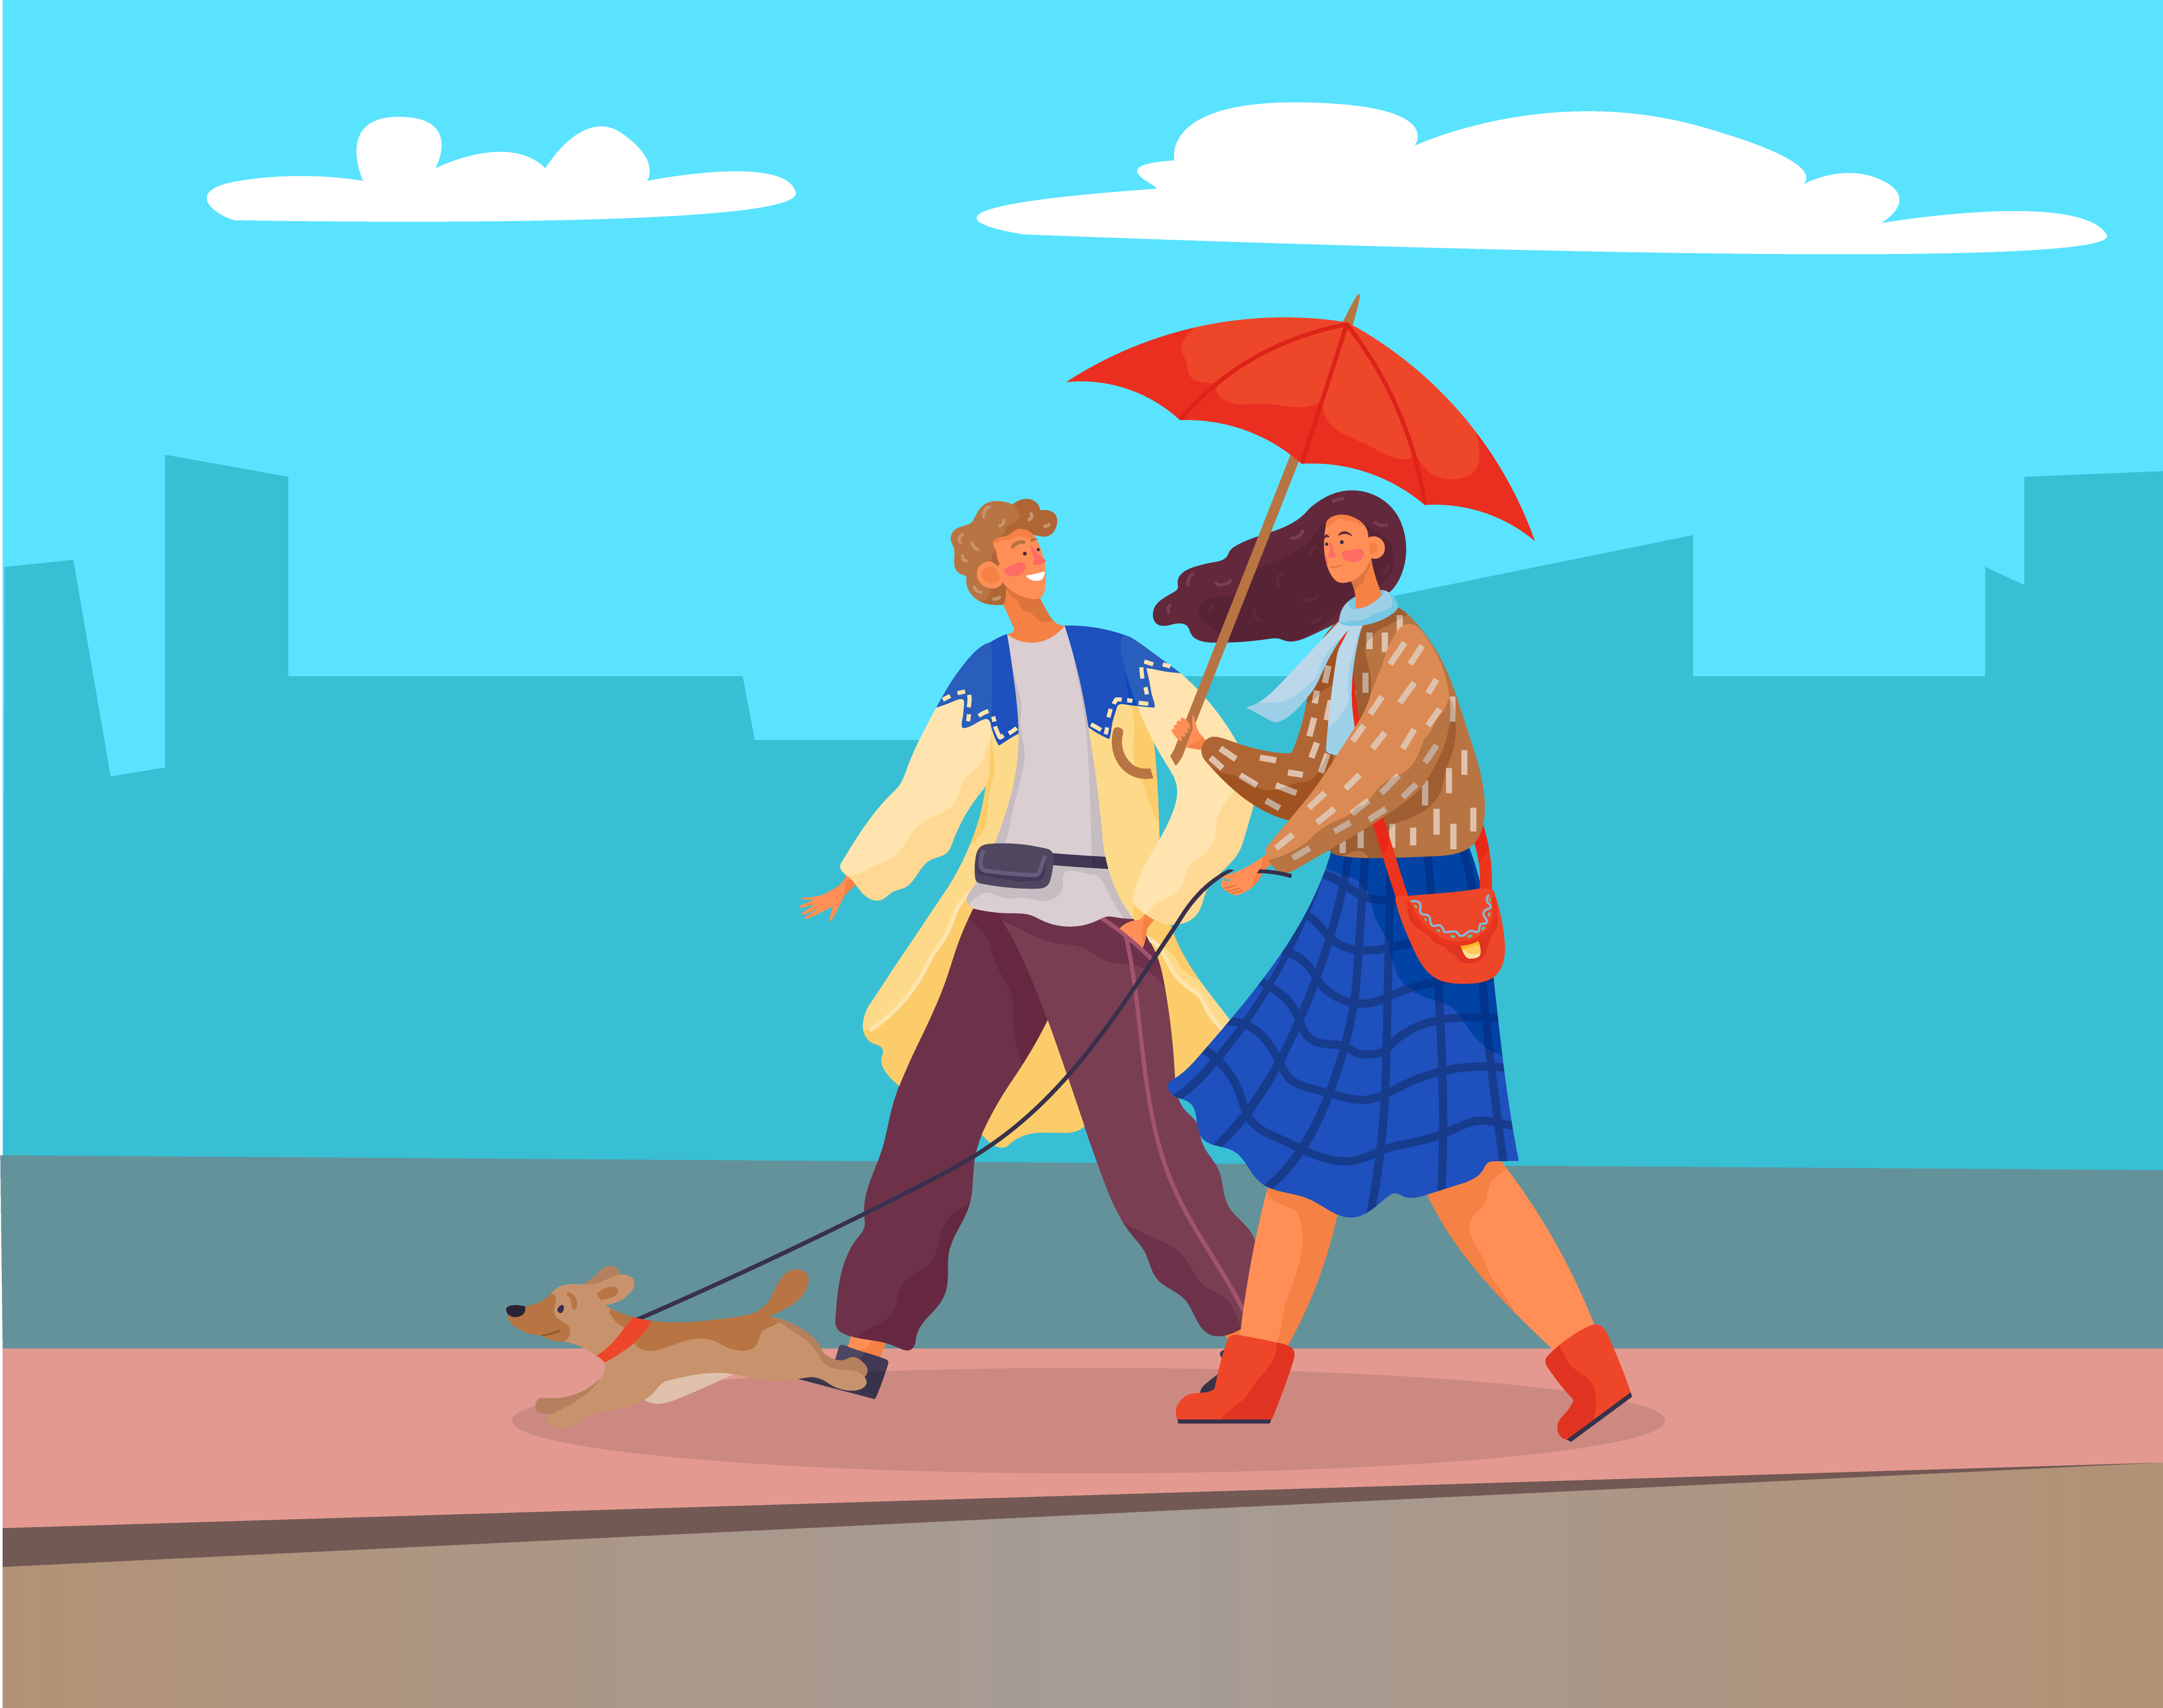 Man and woman walking with domestic pet on city street. People on date or friends meeting. Couple stroll with dog on leash. Silhouette of cityscape on background. Vector illustration in flat style. Man and Woman, Couple Walk with Dog on City Street